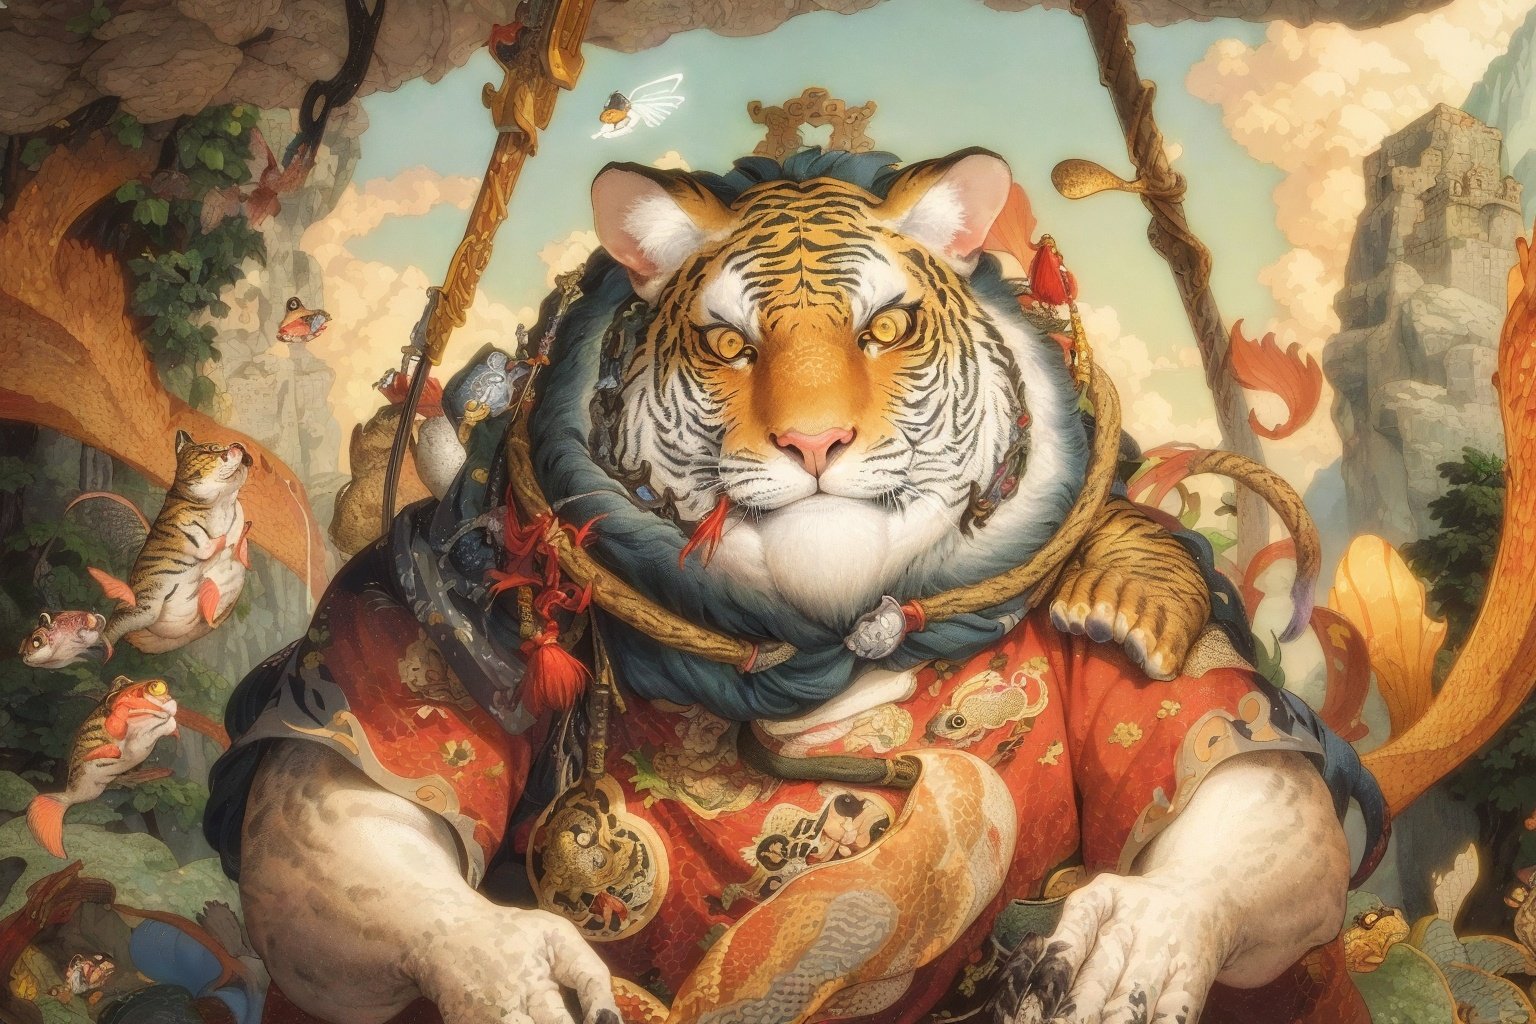 masterpiece,best quality,8K,HDR,Farel Dalrymple,game art,a storybook illustration,fantasy art,portrait,a fish flies by its side,solo,<lora:watercolour 8:0.6>,a tiger holding a hammer in its hand,tiger stripes,wearing ancient chinese hanfu,